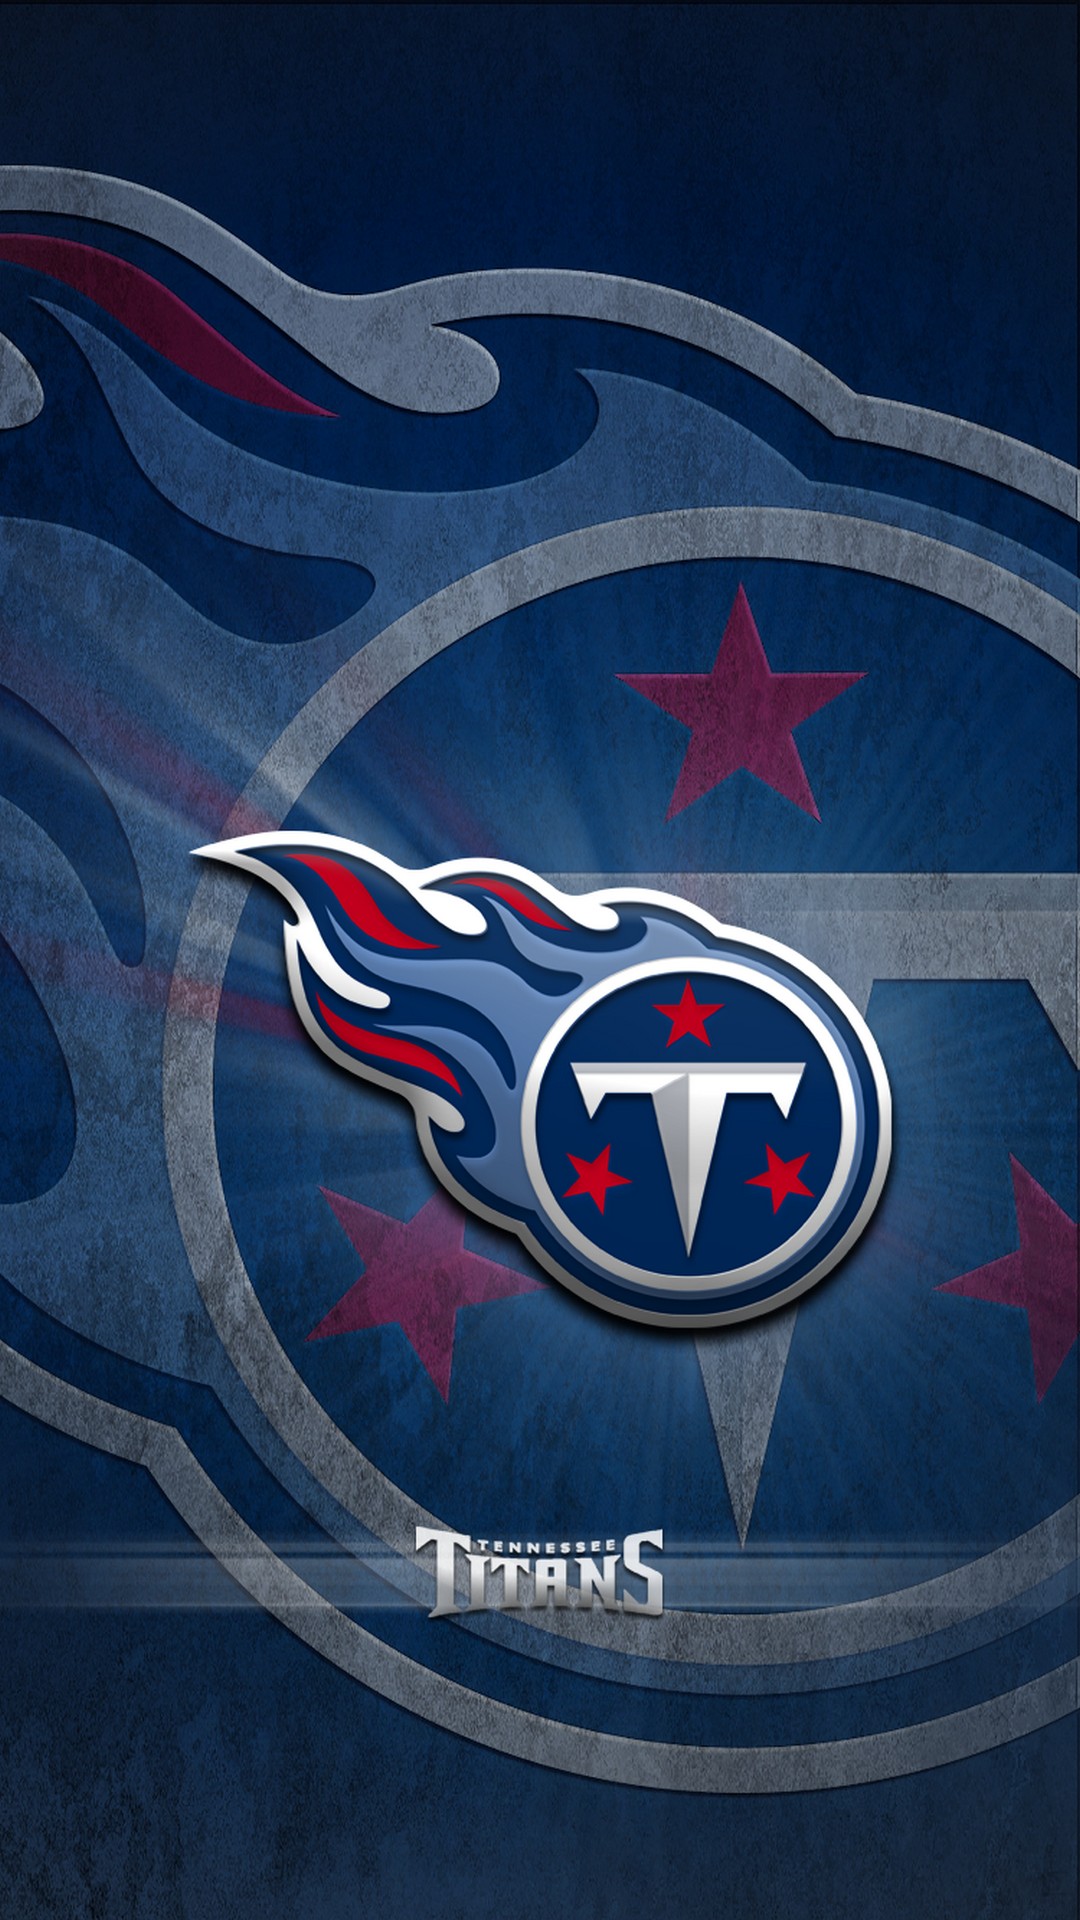 Tennessee Titans iPhone Wallpaper High Quality With high-resolution 1080X1920 pixel. Donwload and set as wallpaper for your iPhone X, iPhone XS home screen backgrounds, XS Max, XR, iPhone8 lock screen wallpaper, iPhone 7, 6, SE, and other mobile devices